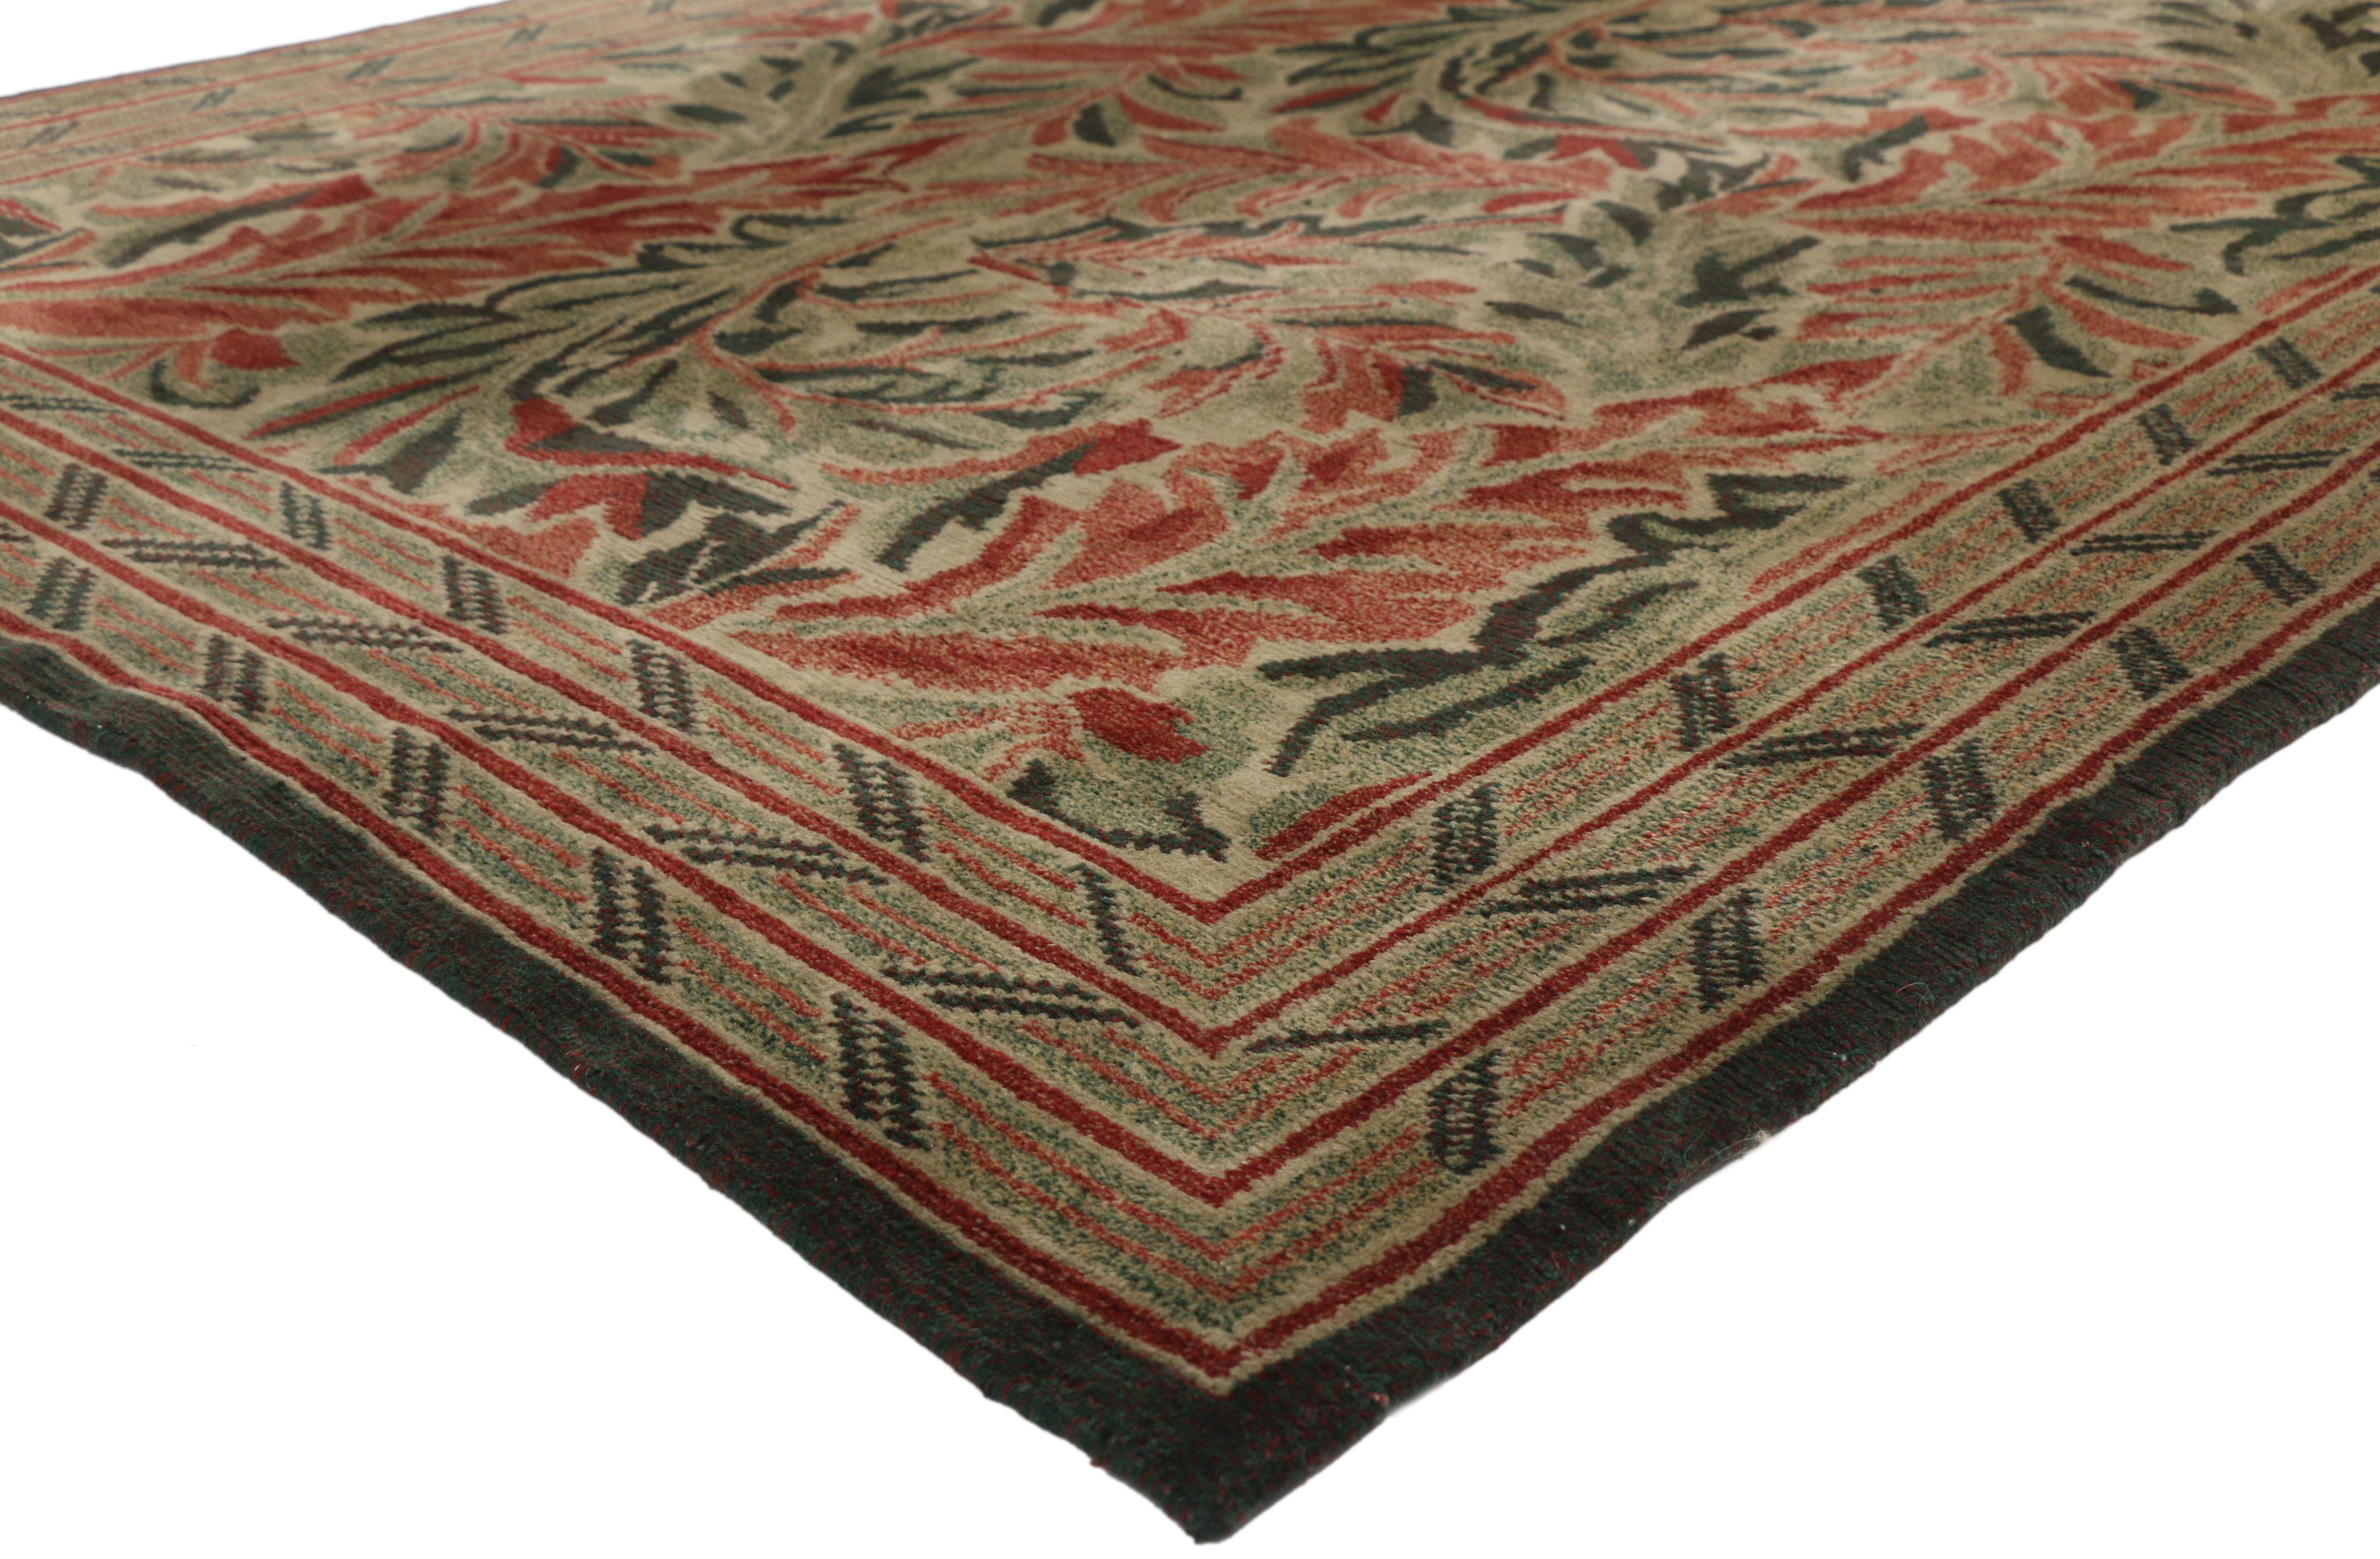 77272, vintage Swedish William Morris Acanthus inspired rug with Arts & Crafts style. With architectural elements of naturalistic forms and soft colors, this hand knotted wool vintage Swedish rug beautifully embodies Arts & Crafts style. A repeating